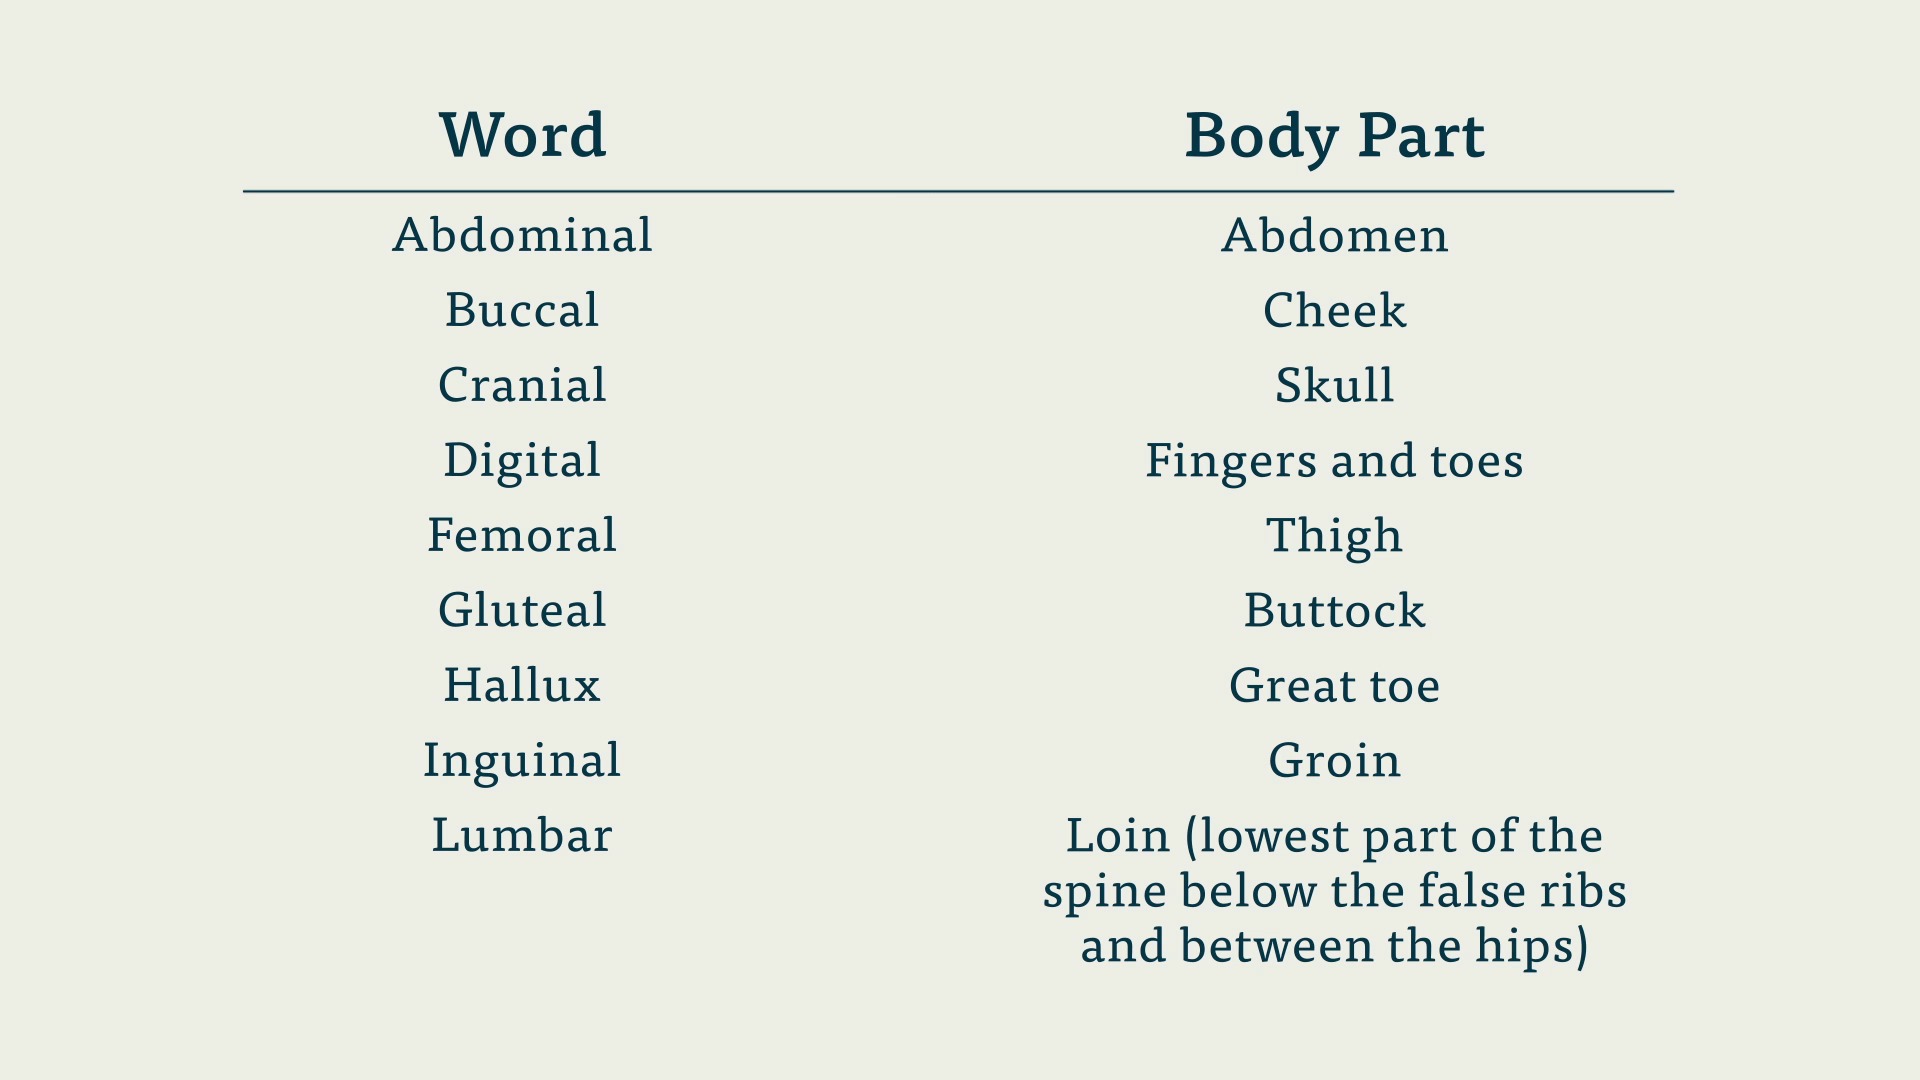 Learn Medical Terminology and Human Anatomy